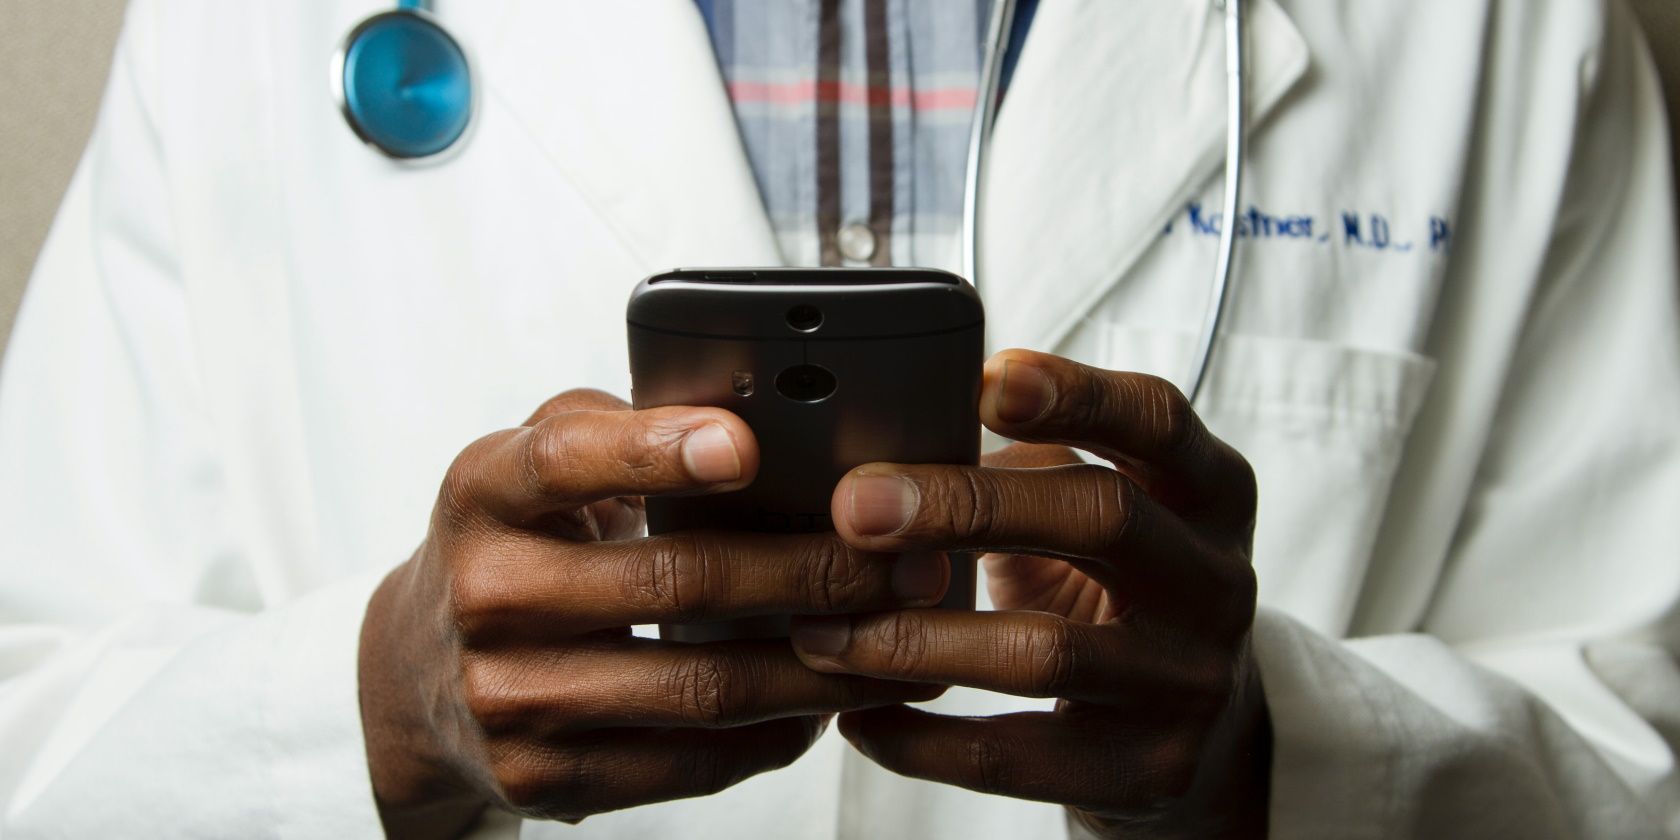 A doctor in a white coat looking at a smartphone